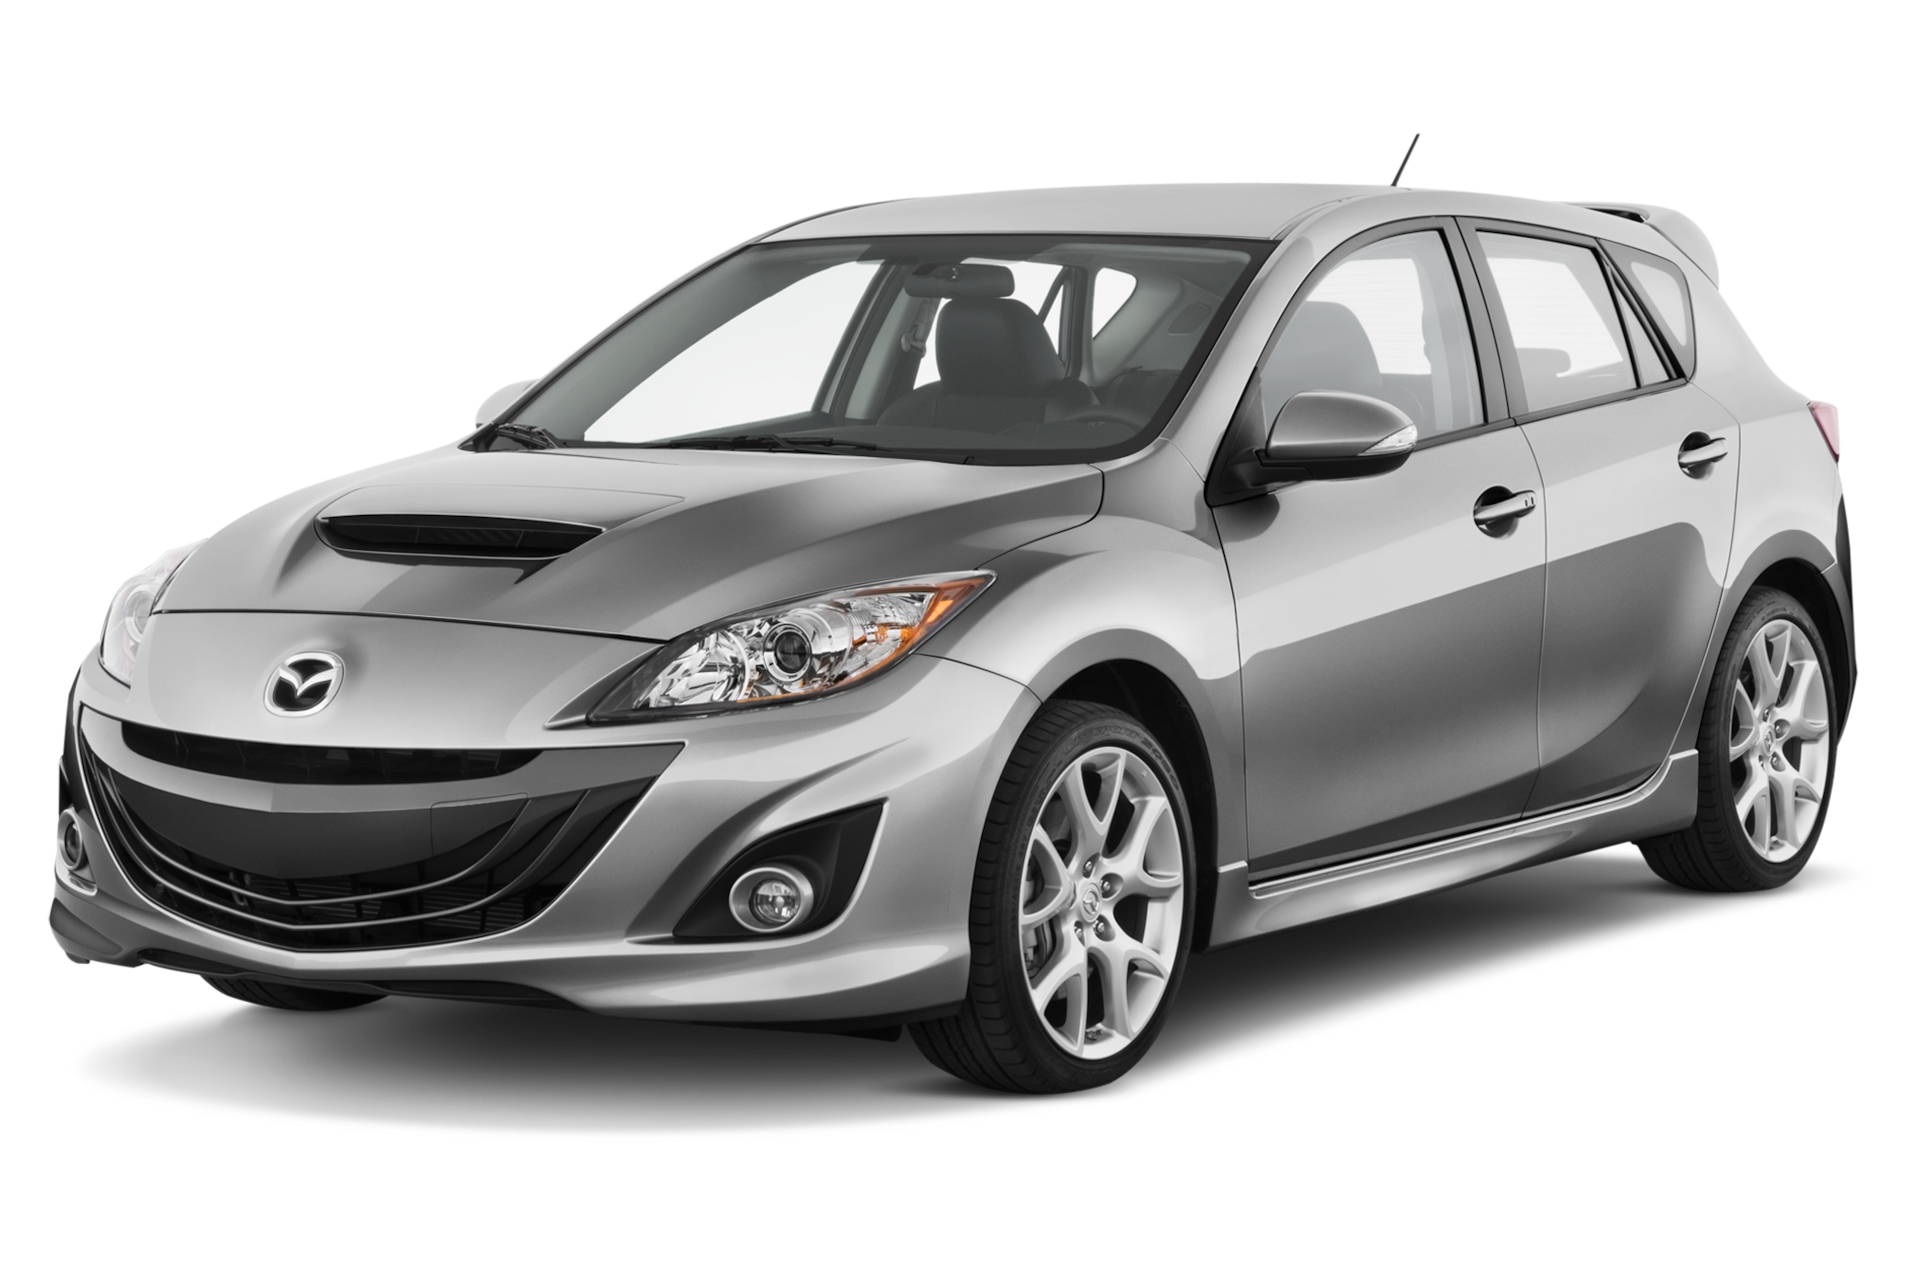 2010 Mazda MAZDASPEED3 Prices, Reviews, and Photos - MotorTrend